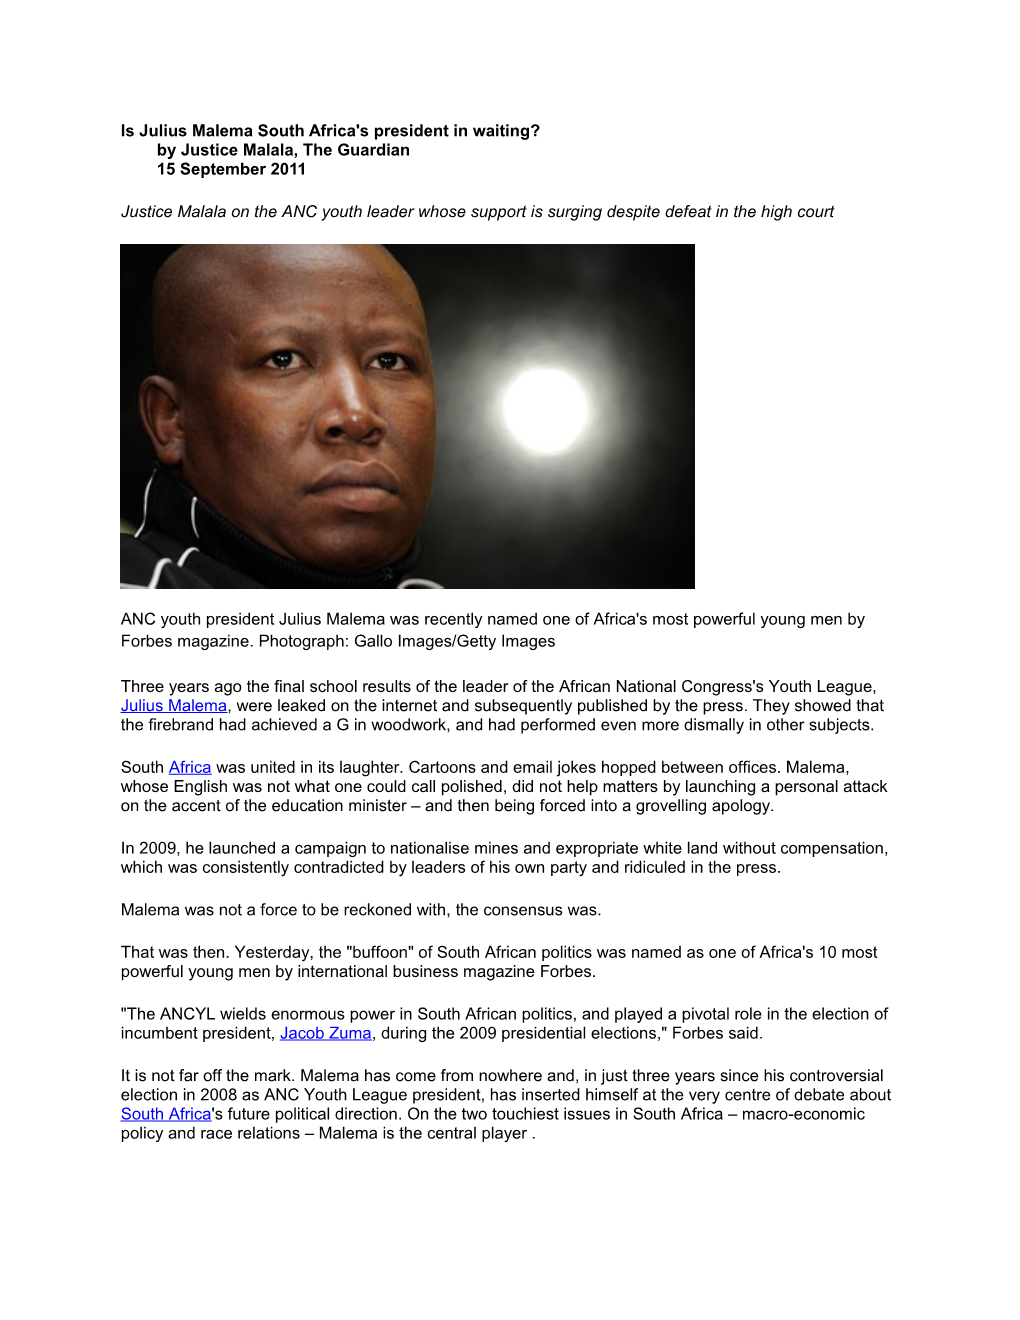 Is Julius Malema South Africa's President in Waiting?By Justice Malala, the Guardian15